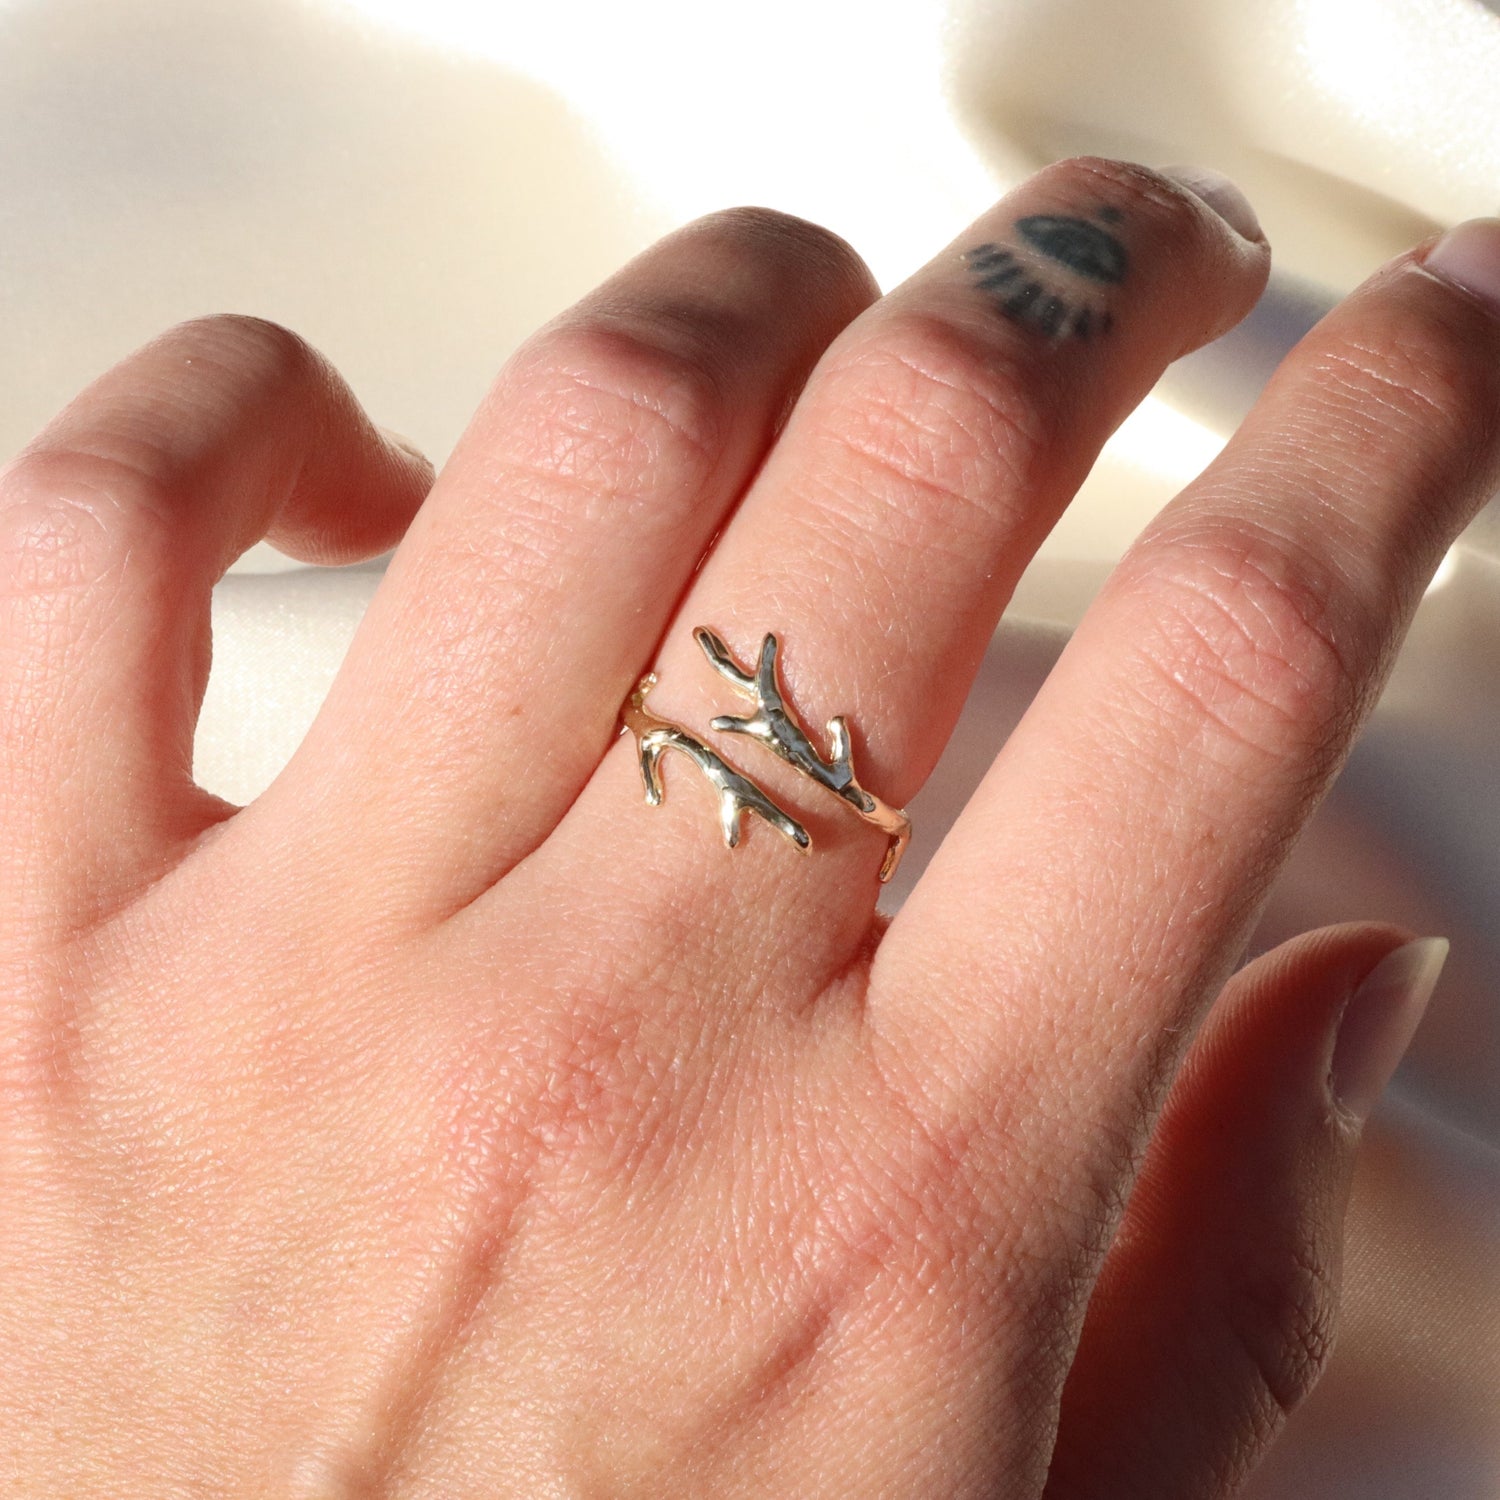 A gold coral branch ring is shown on a finger. This ring is open, showing that it is adjustable.